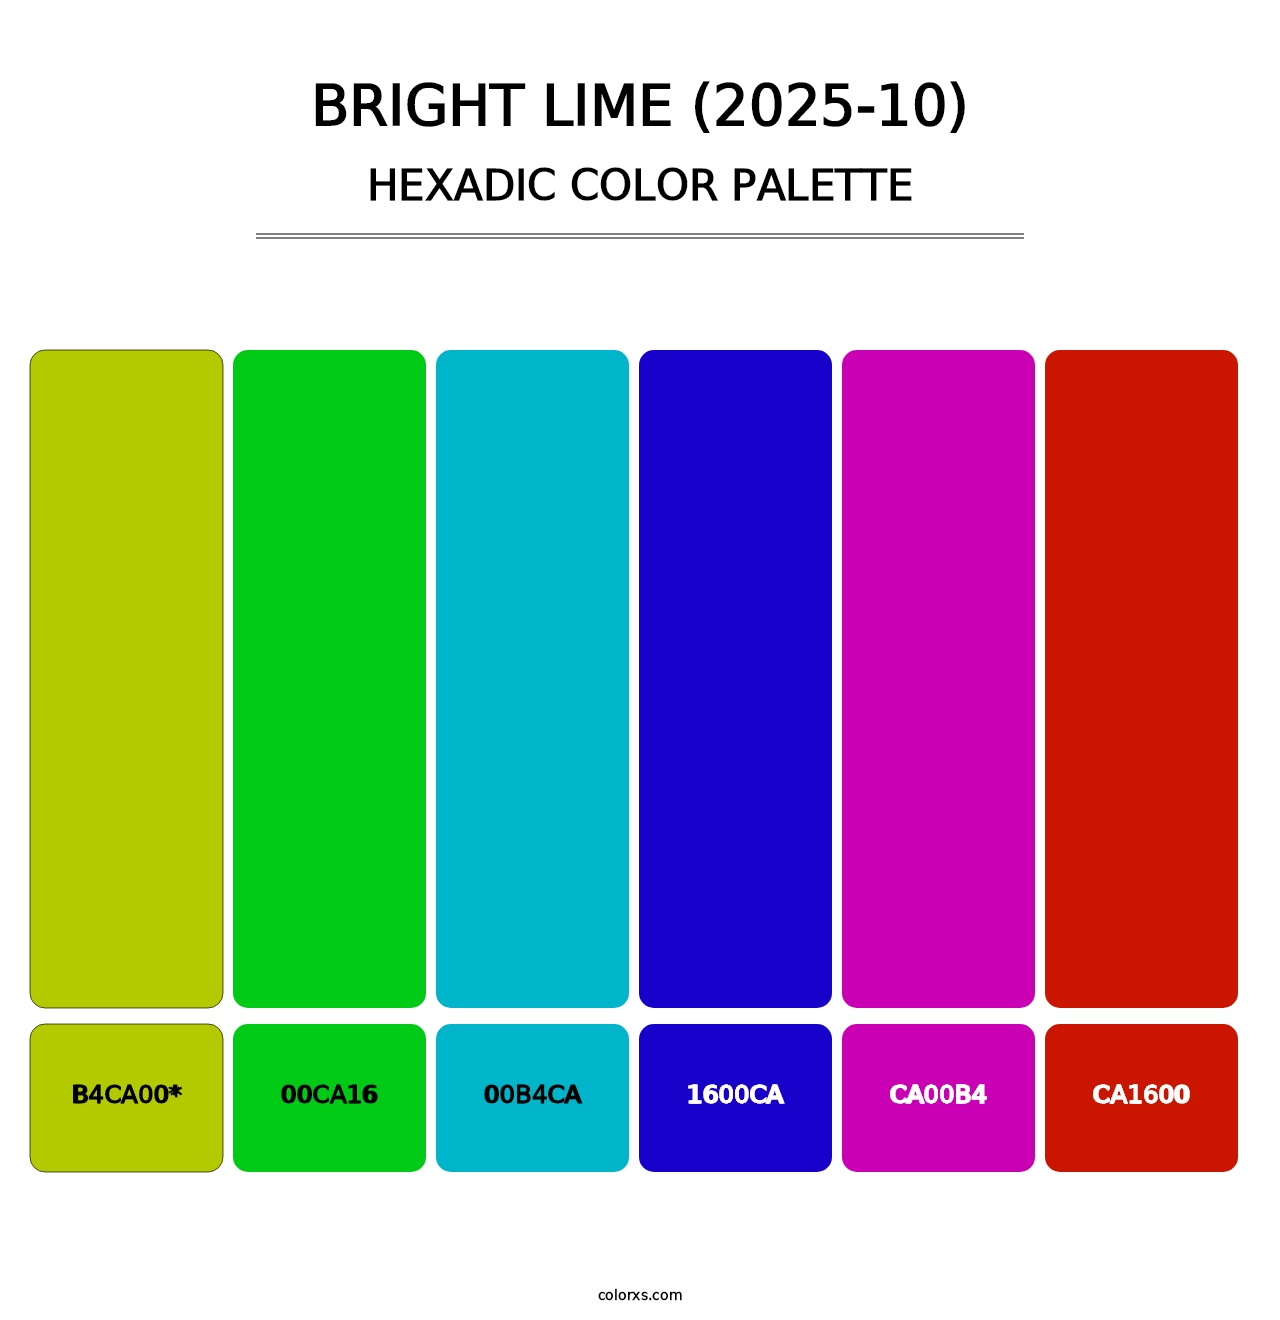 Bright Lime (2025-10) - Hexadic Color Palette